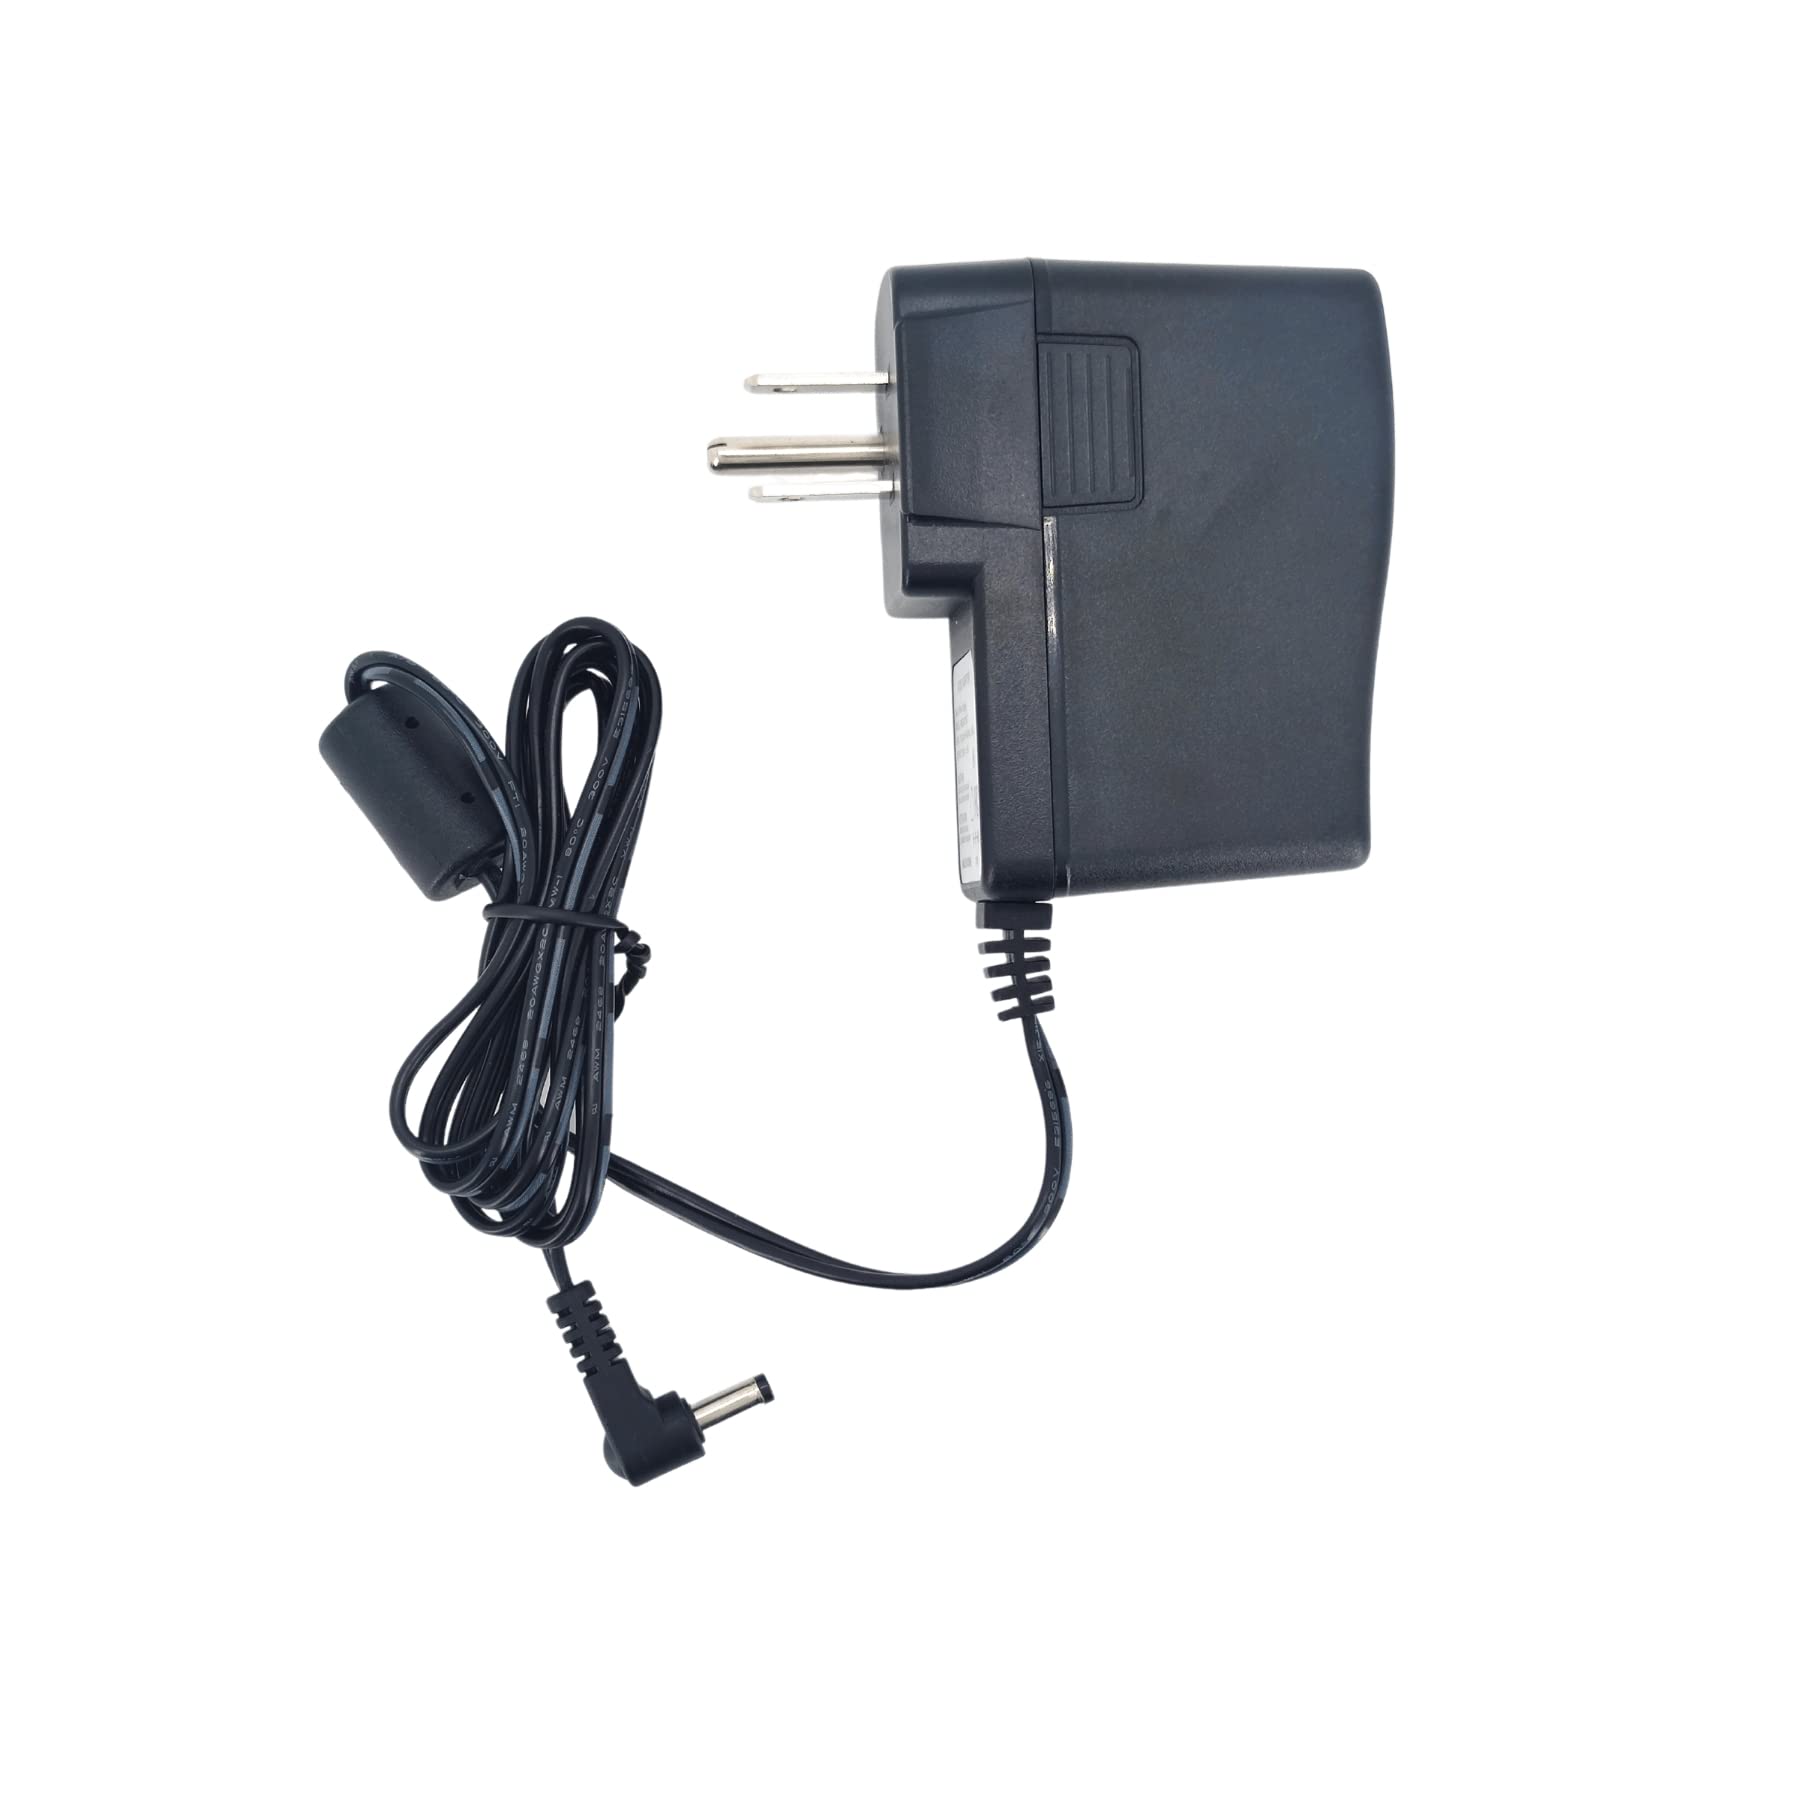 EP73954 A/C Power Supply Adapter for Delta Touch Kitchen Sink Faucets with Touch2O Technology with Gen 3 Solenoid EP102157